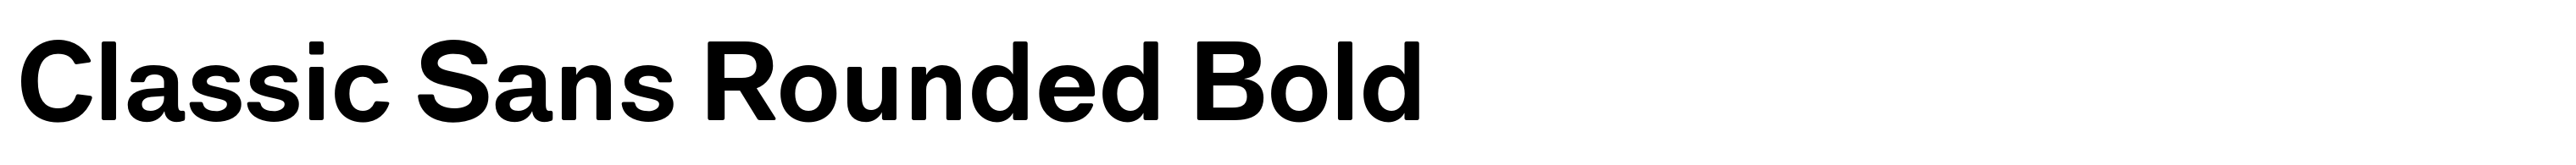 Classic Sans Rounded Bold